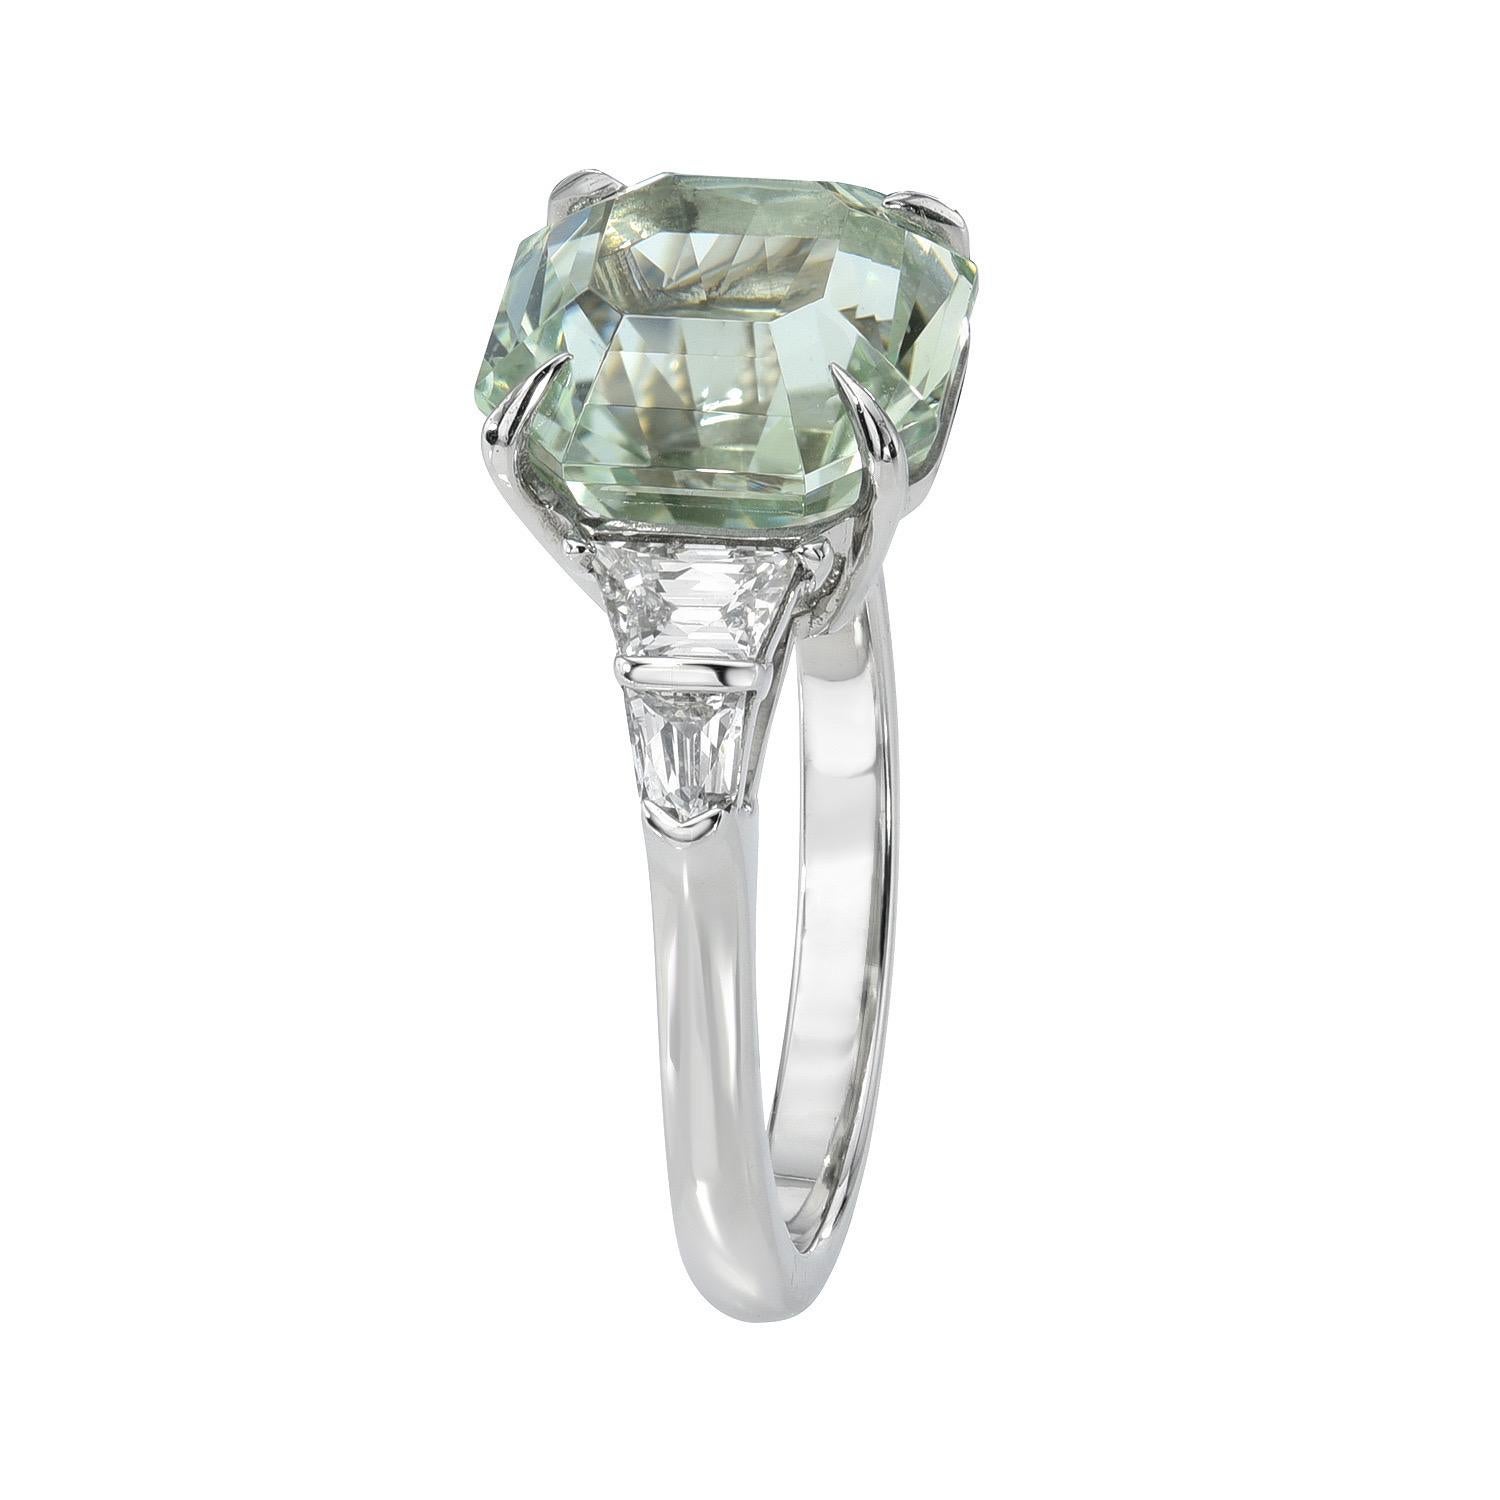 Marvelous 4.96 carat Natural Green Beryl square radiant platinum ring, decorated with a total of 0.55 carat French cut Trapezoid and French cut Bullet diamonds, E/VS.
Ring size 6. Resizing is complementary upon request.
Returns are accepted and paid